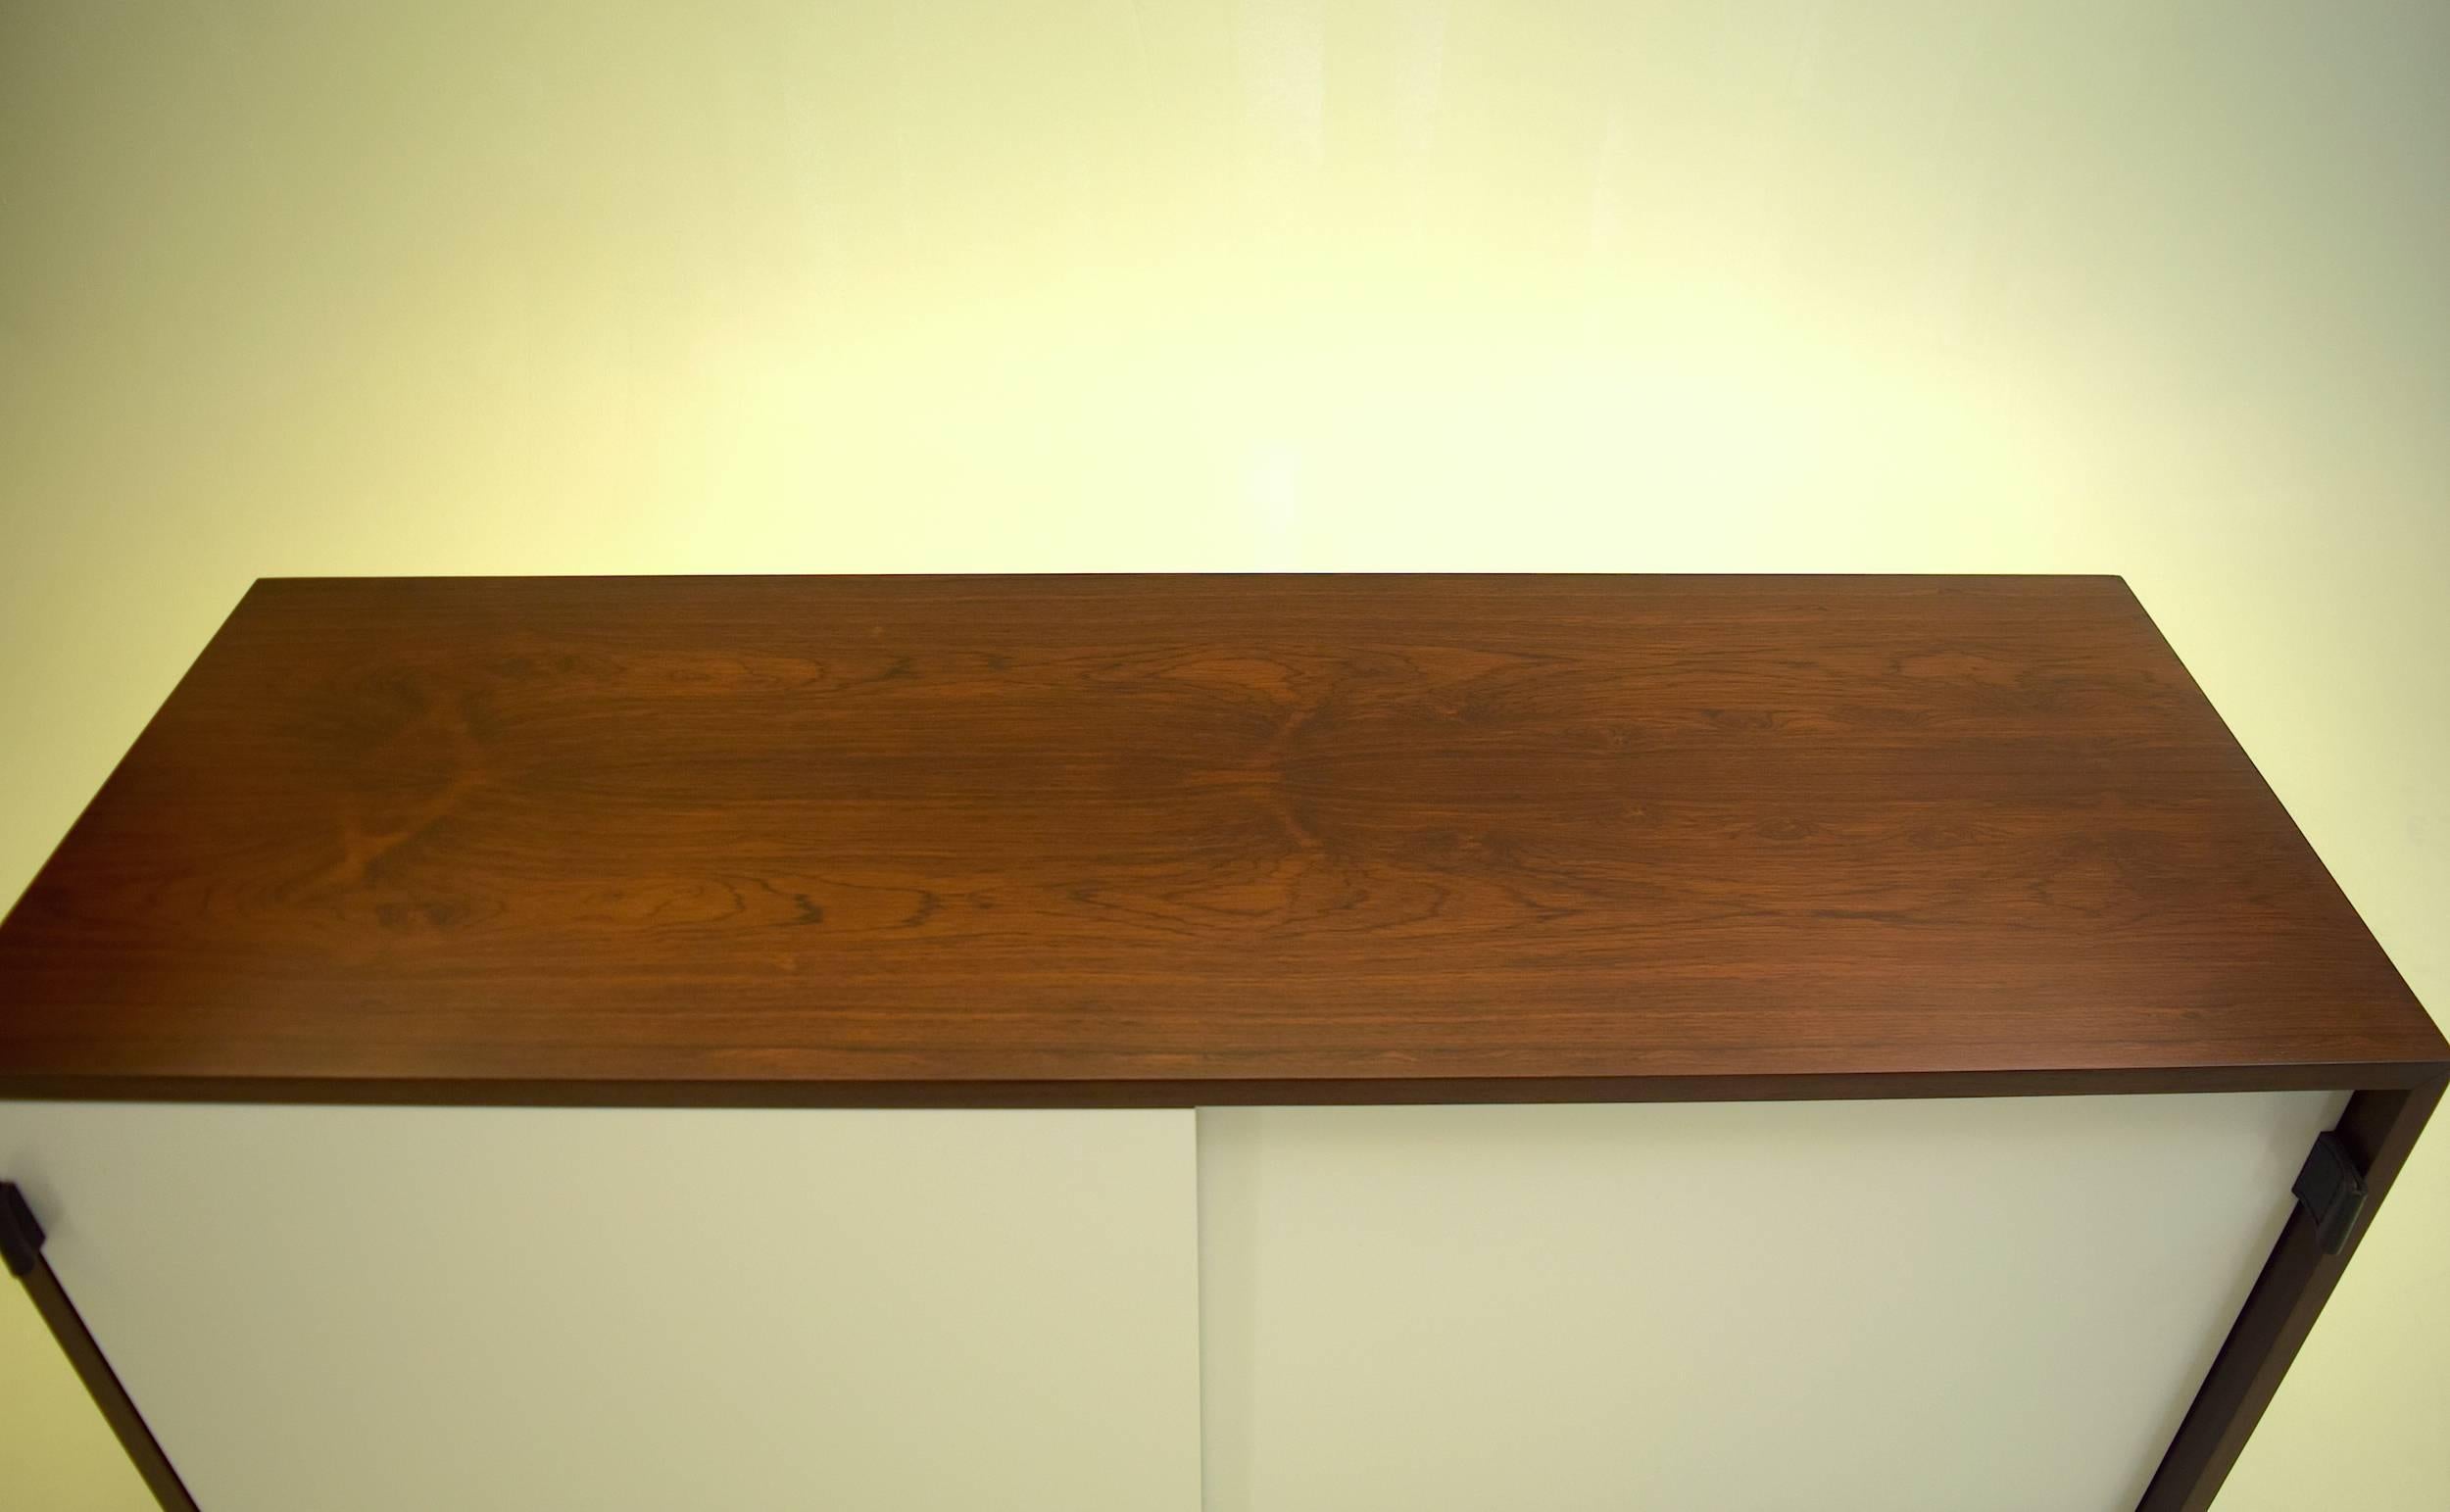 Lacquer Four Foot Rosewood Cabinet by Florence Knoll